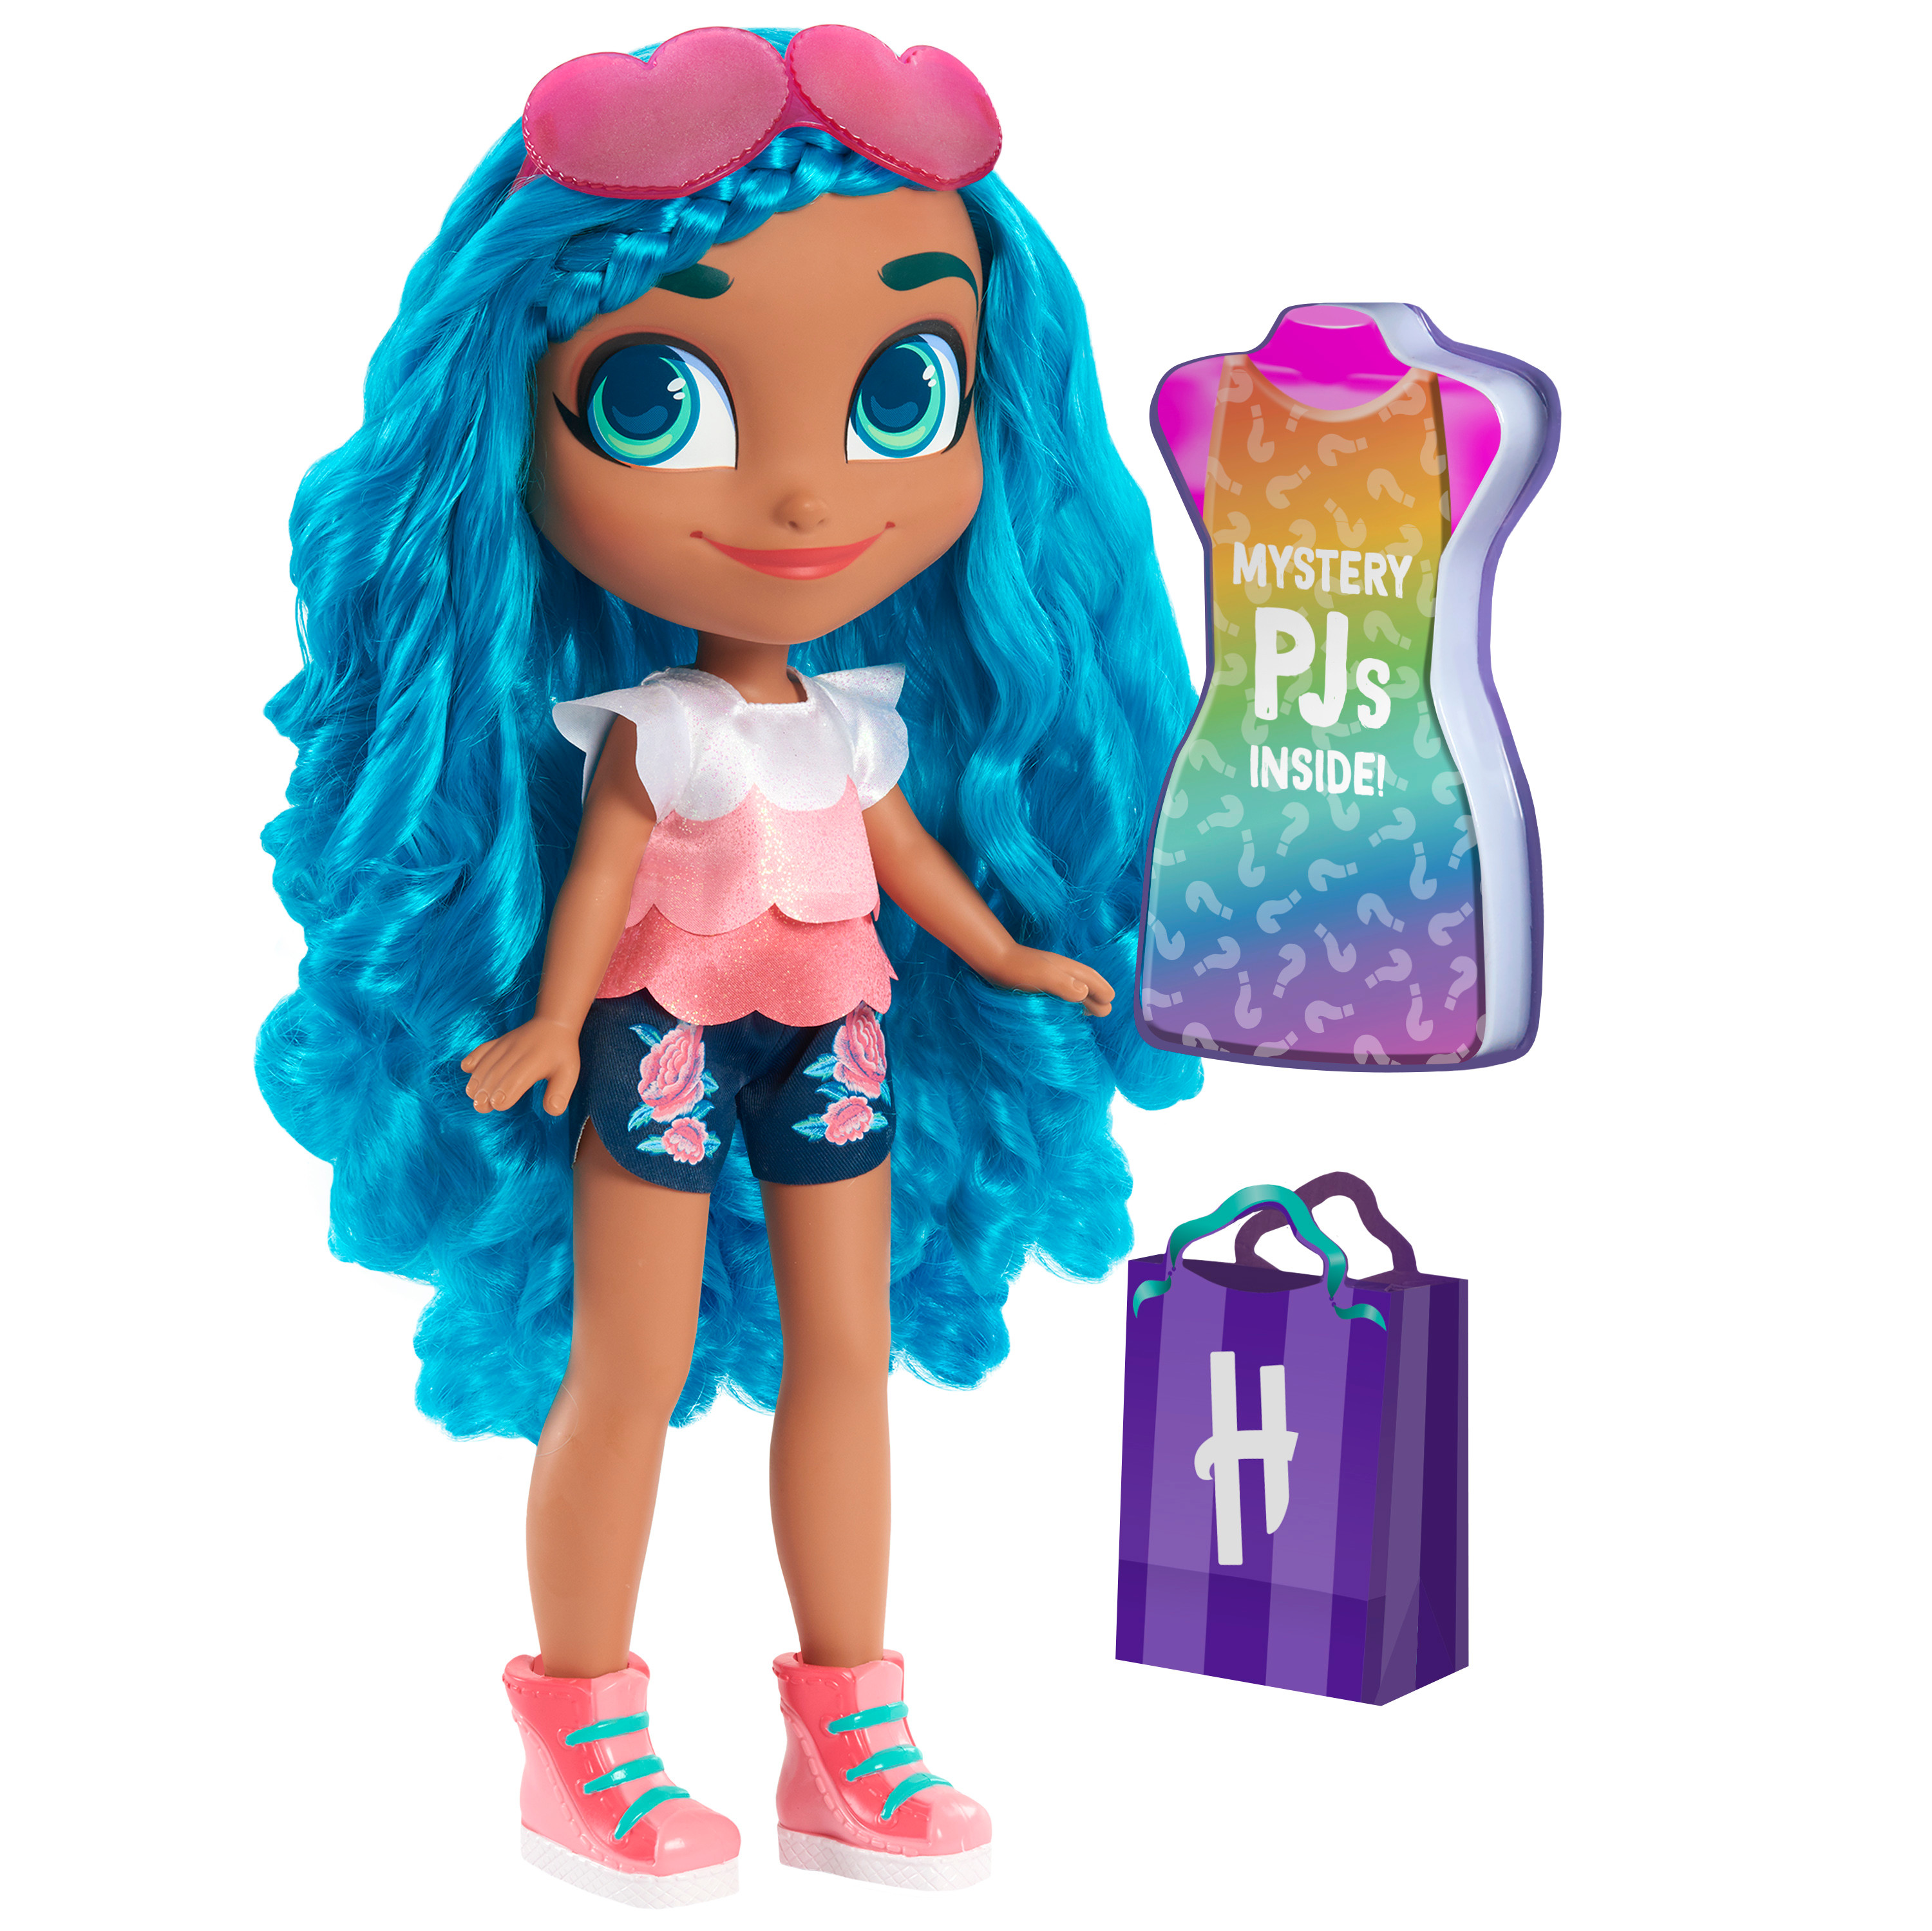 Hairdorables 18-Inch Mystery Fashion Noah Doll, Includes Surprise Outfit, Blue Hair,  Kids Toys for Ages 3 Up, Gifts and Presents - image 1 of 3